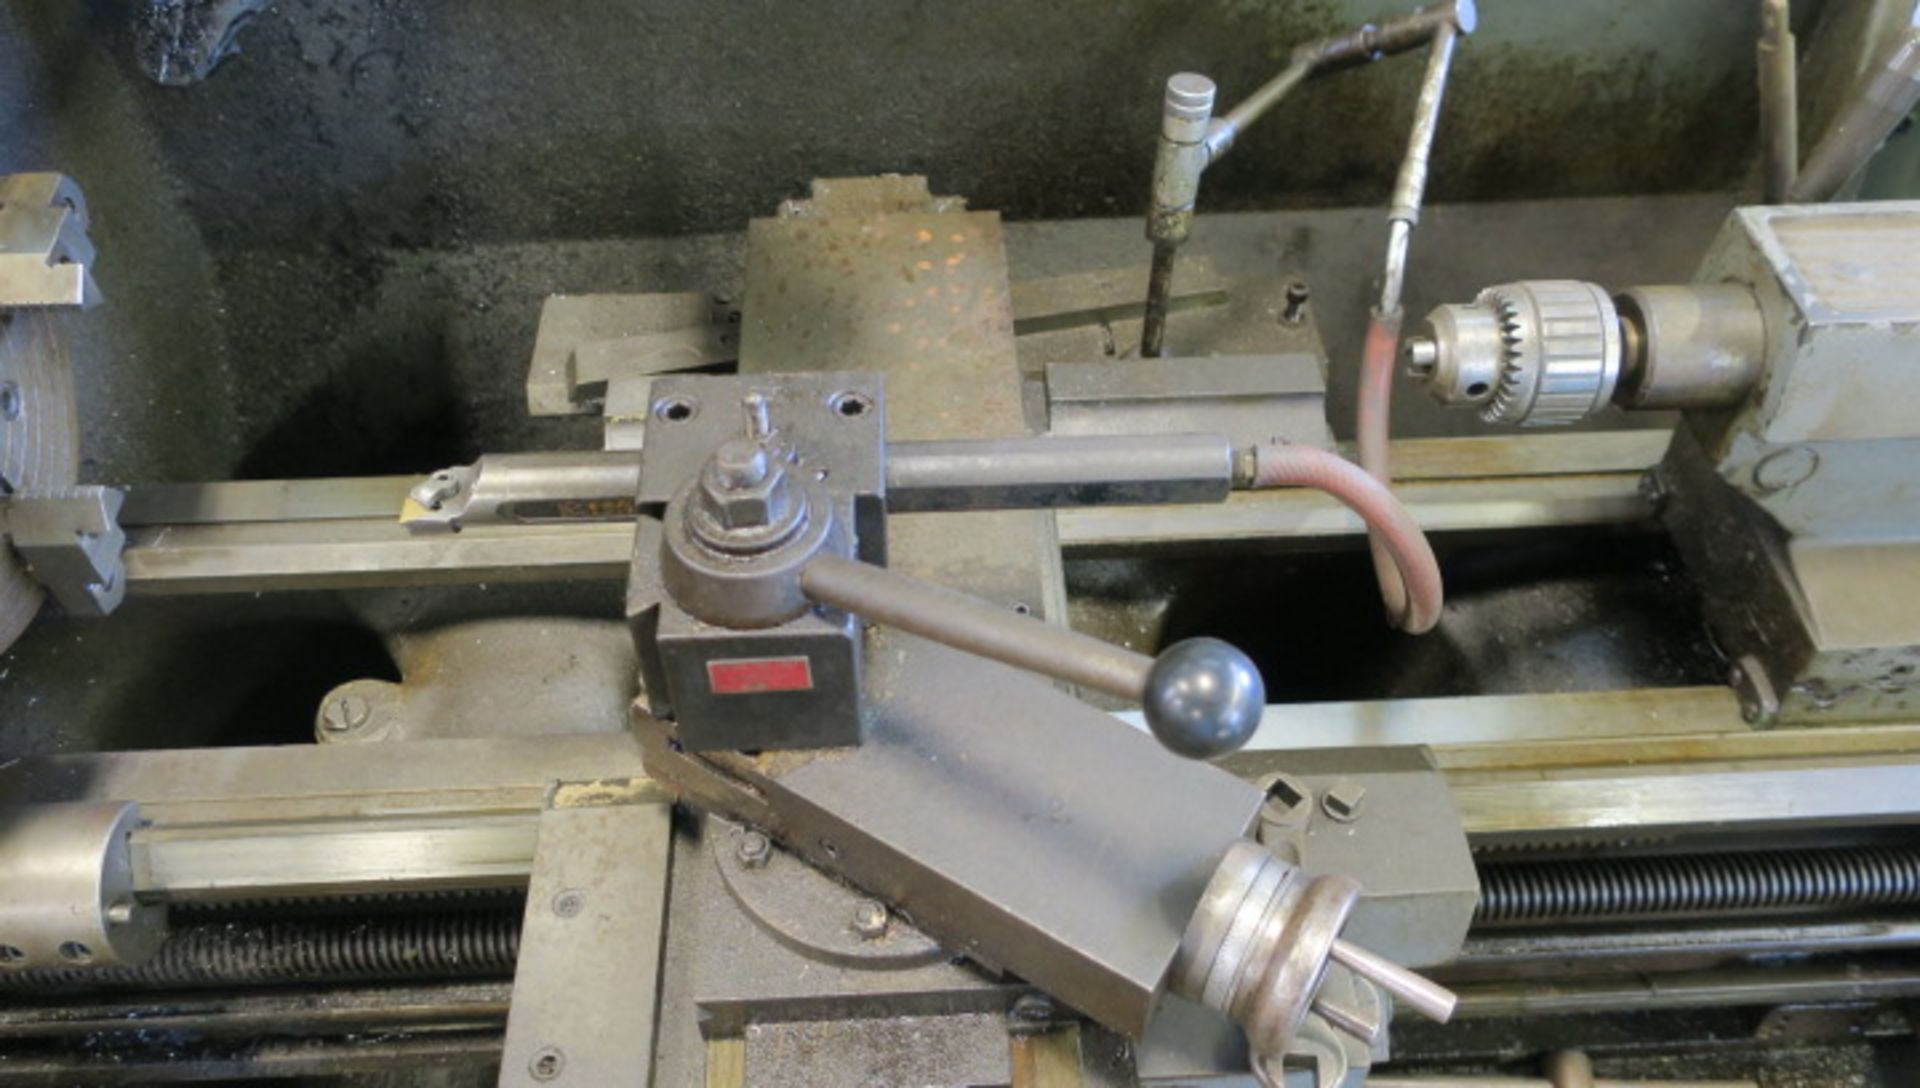 ENGINE LATHE, CLAUSING COLCHESTER 13" X 30", 2-1/4" spdl. hole, spds: 25-2000 RPM, inch/metric - Image 2 of 5